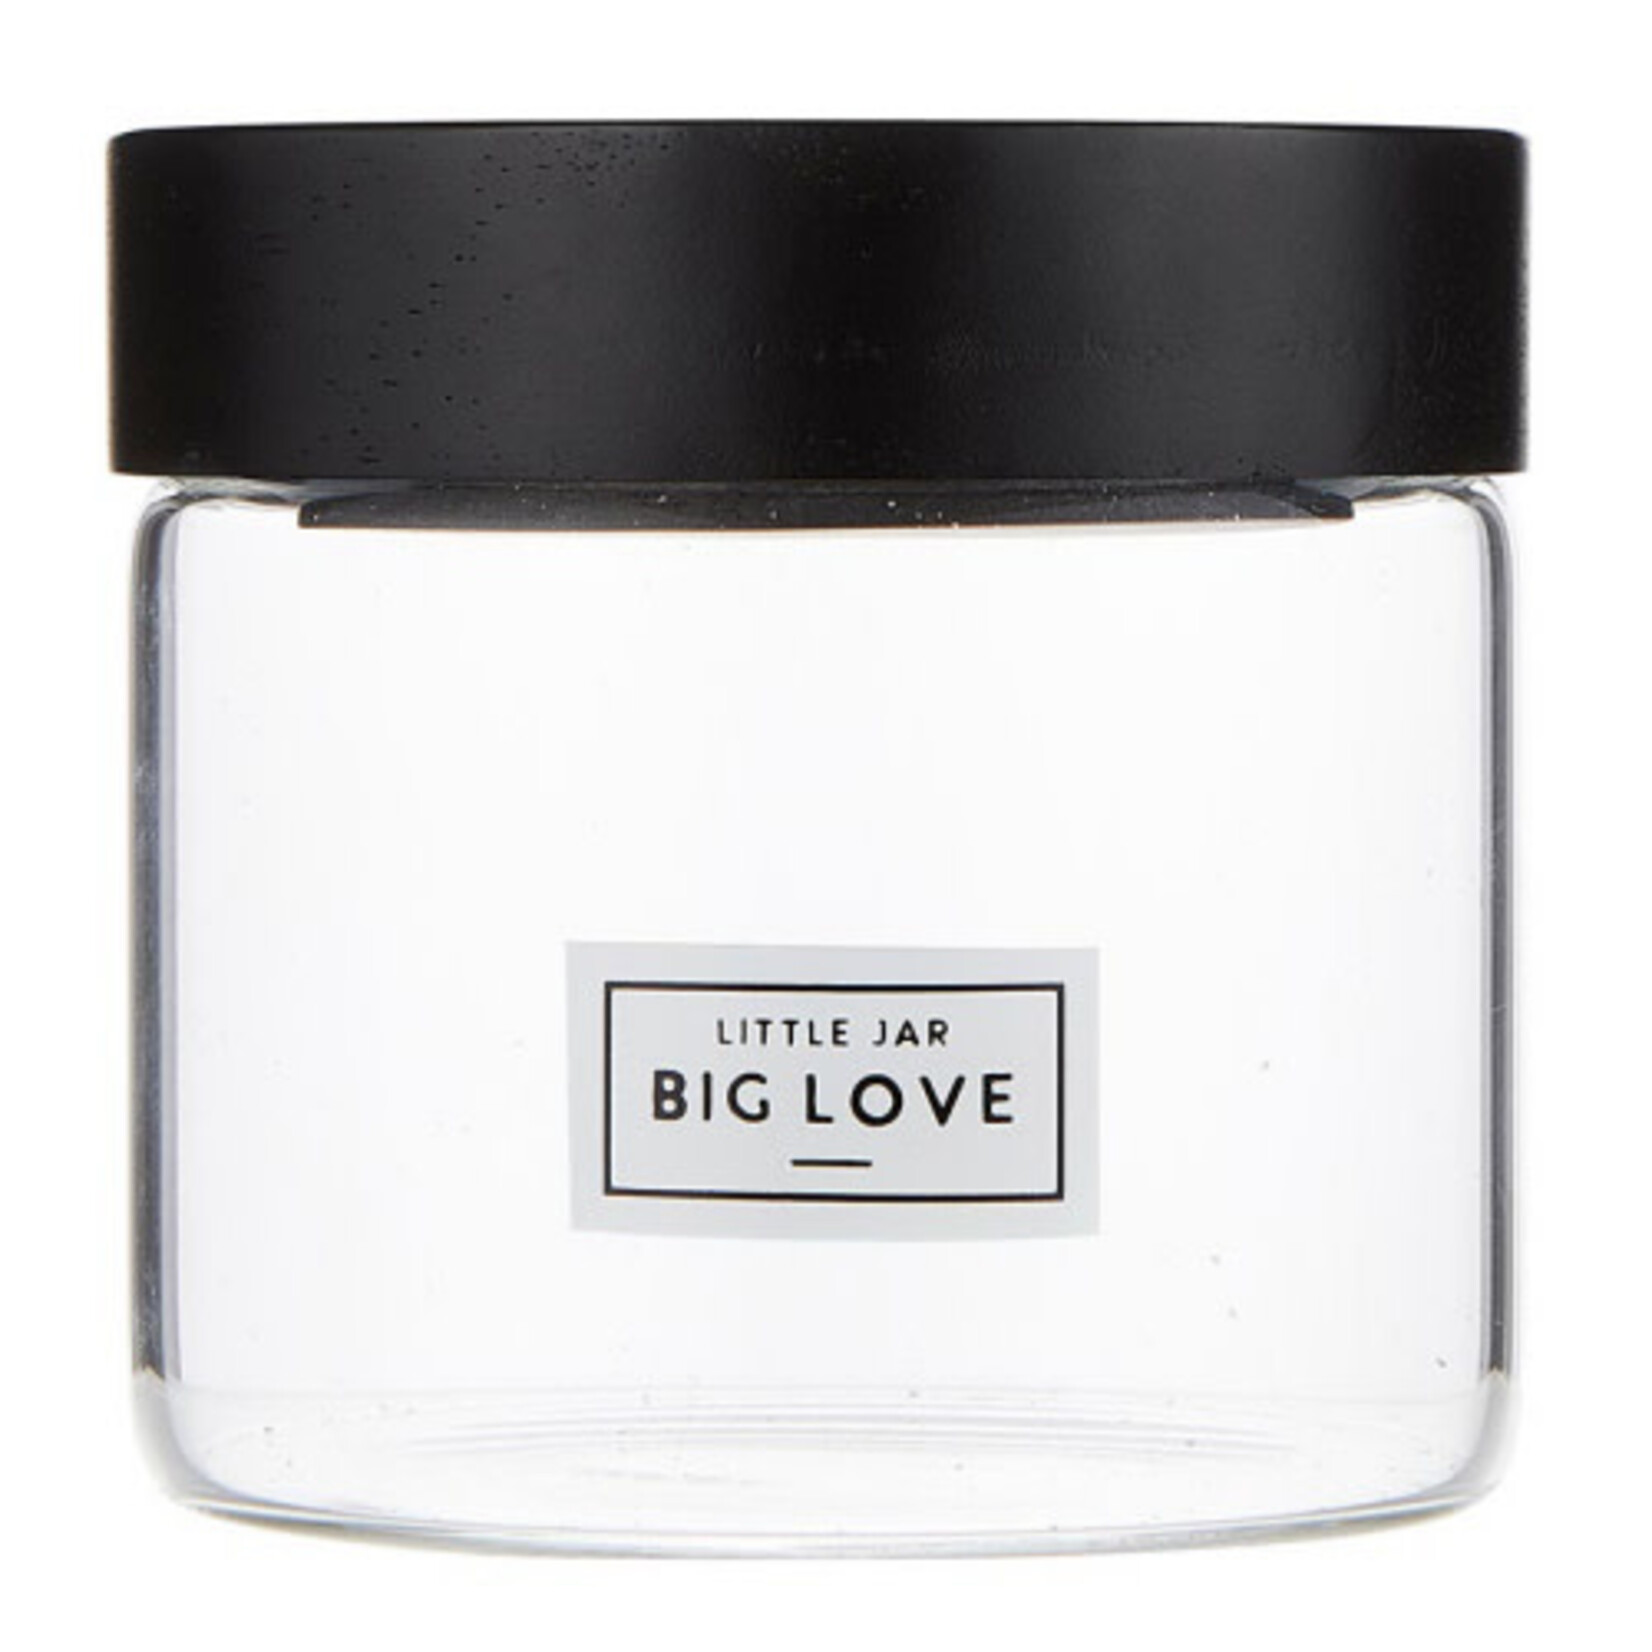 Creative Brands Big Love Pantry Canister - 17oz.